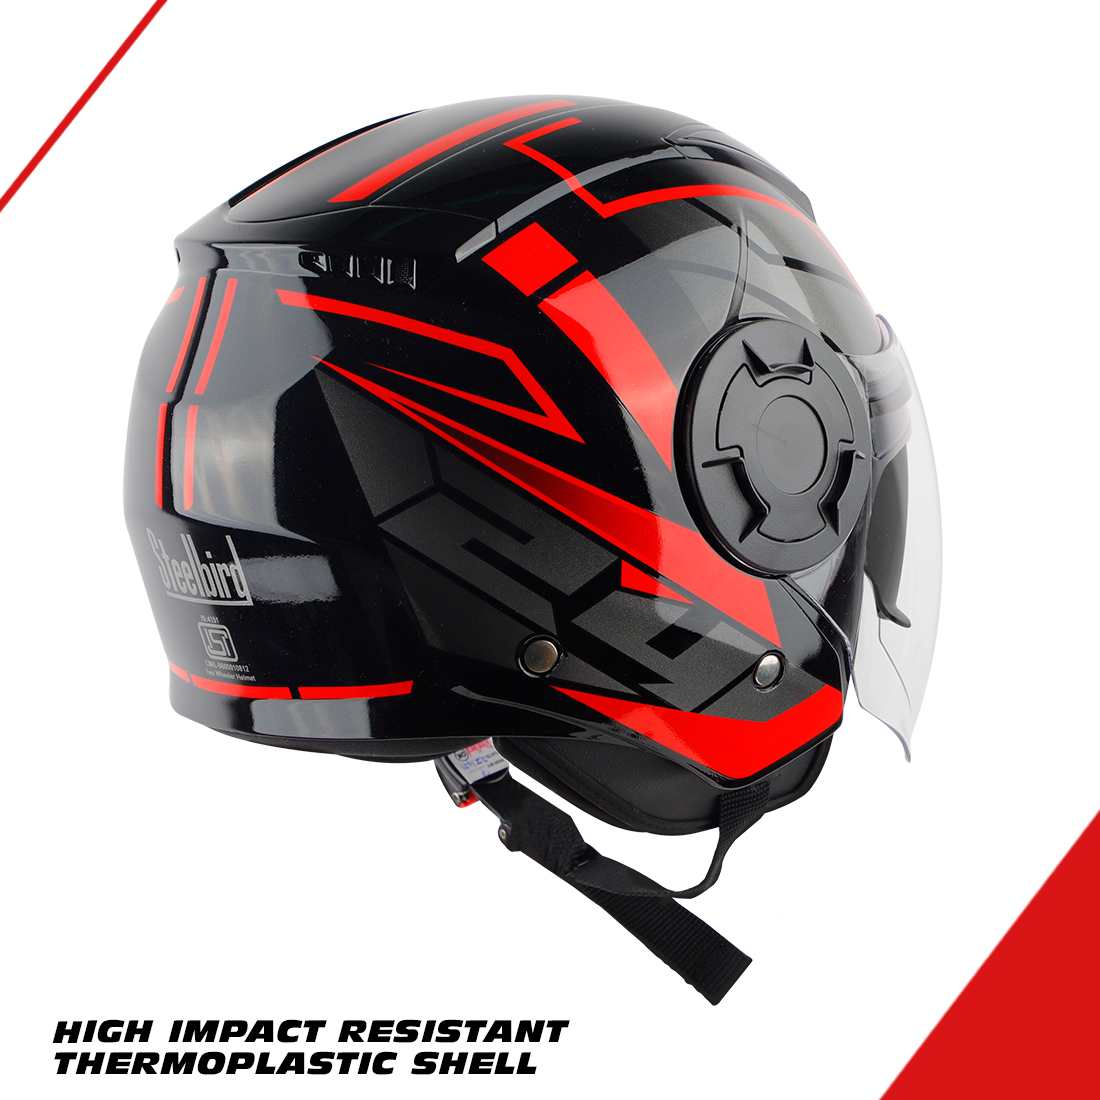 Steelbird SBH-31 Baron 24 ISI Certified Open Face Helmet For Men And Women With Inner Sun Shield(Dual Visor Mechanism) (Glossy Black Red)